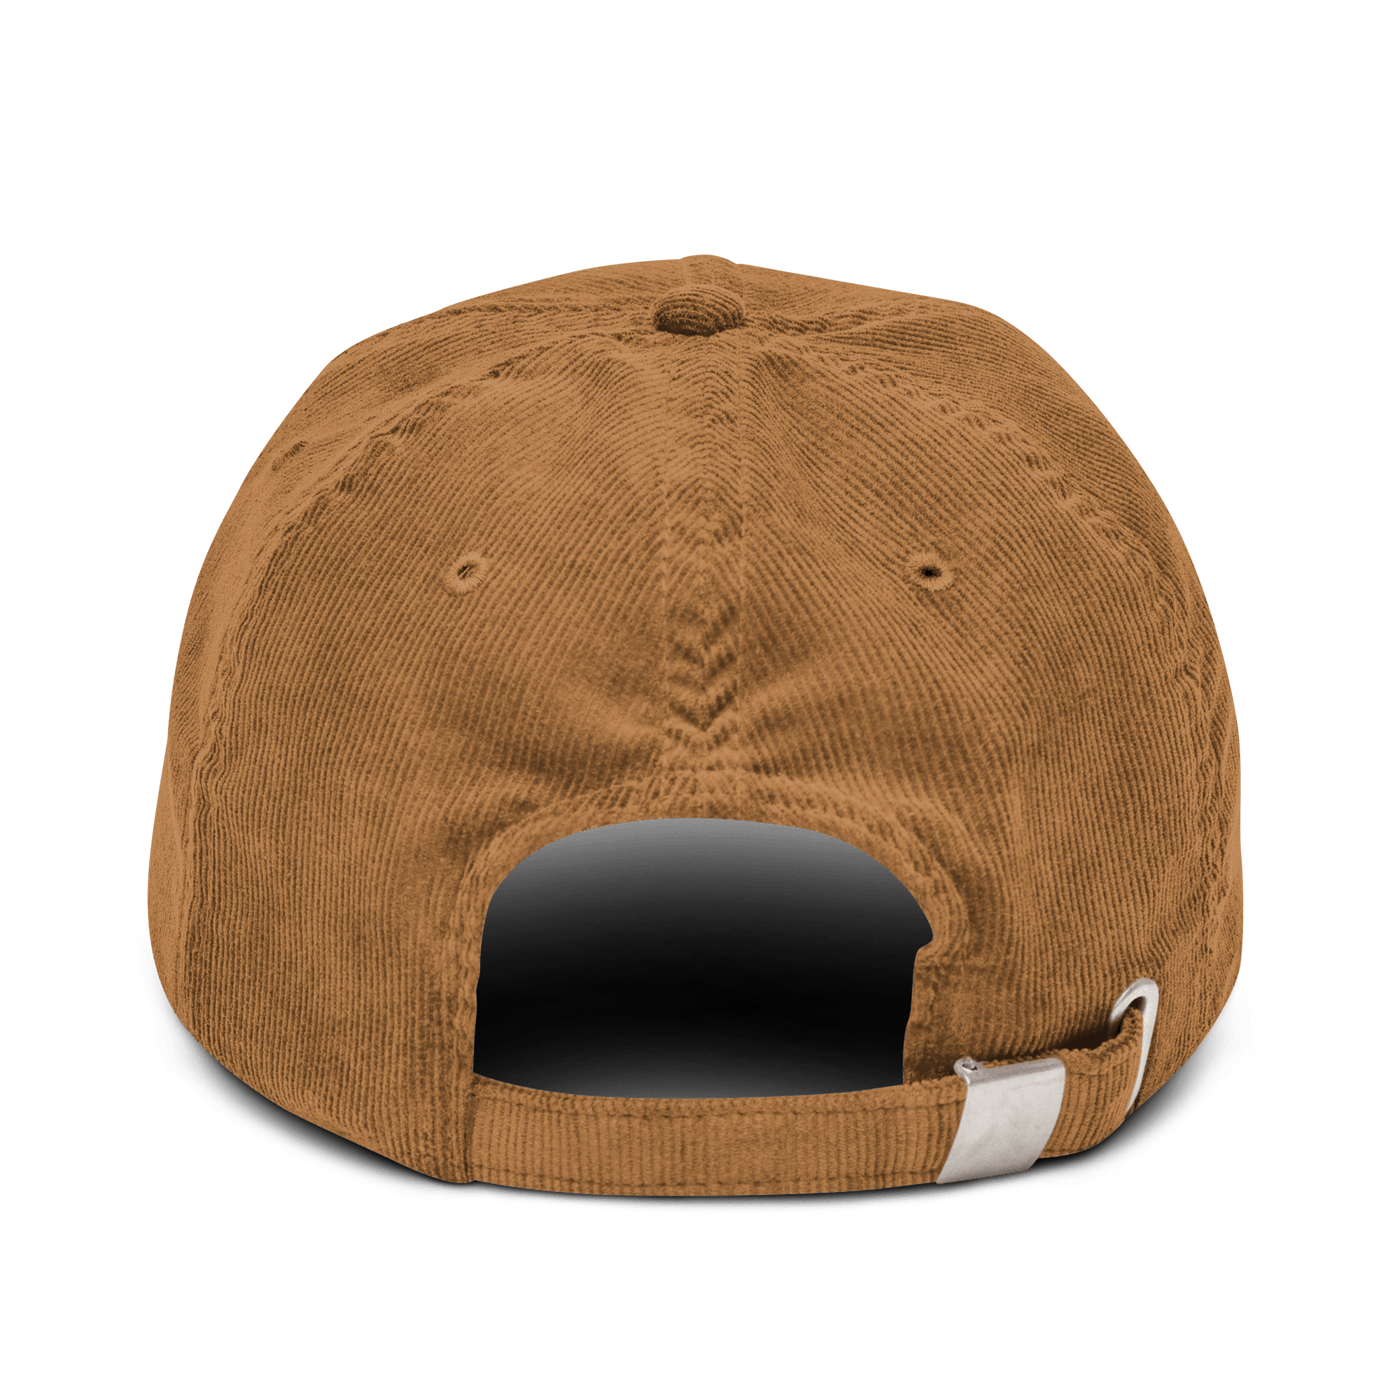 Humanity Runs on Coffee Corduroy hat - Camel - - Just Another Cap Store